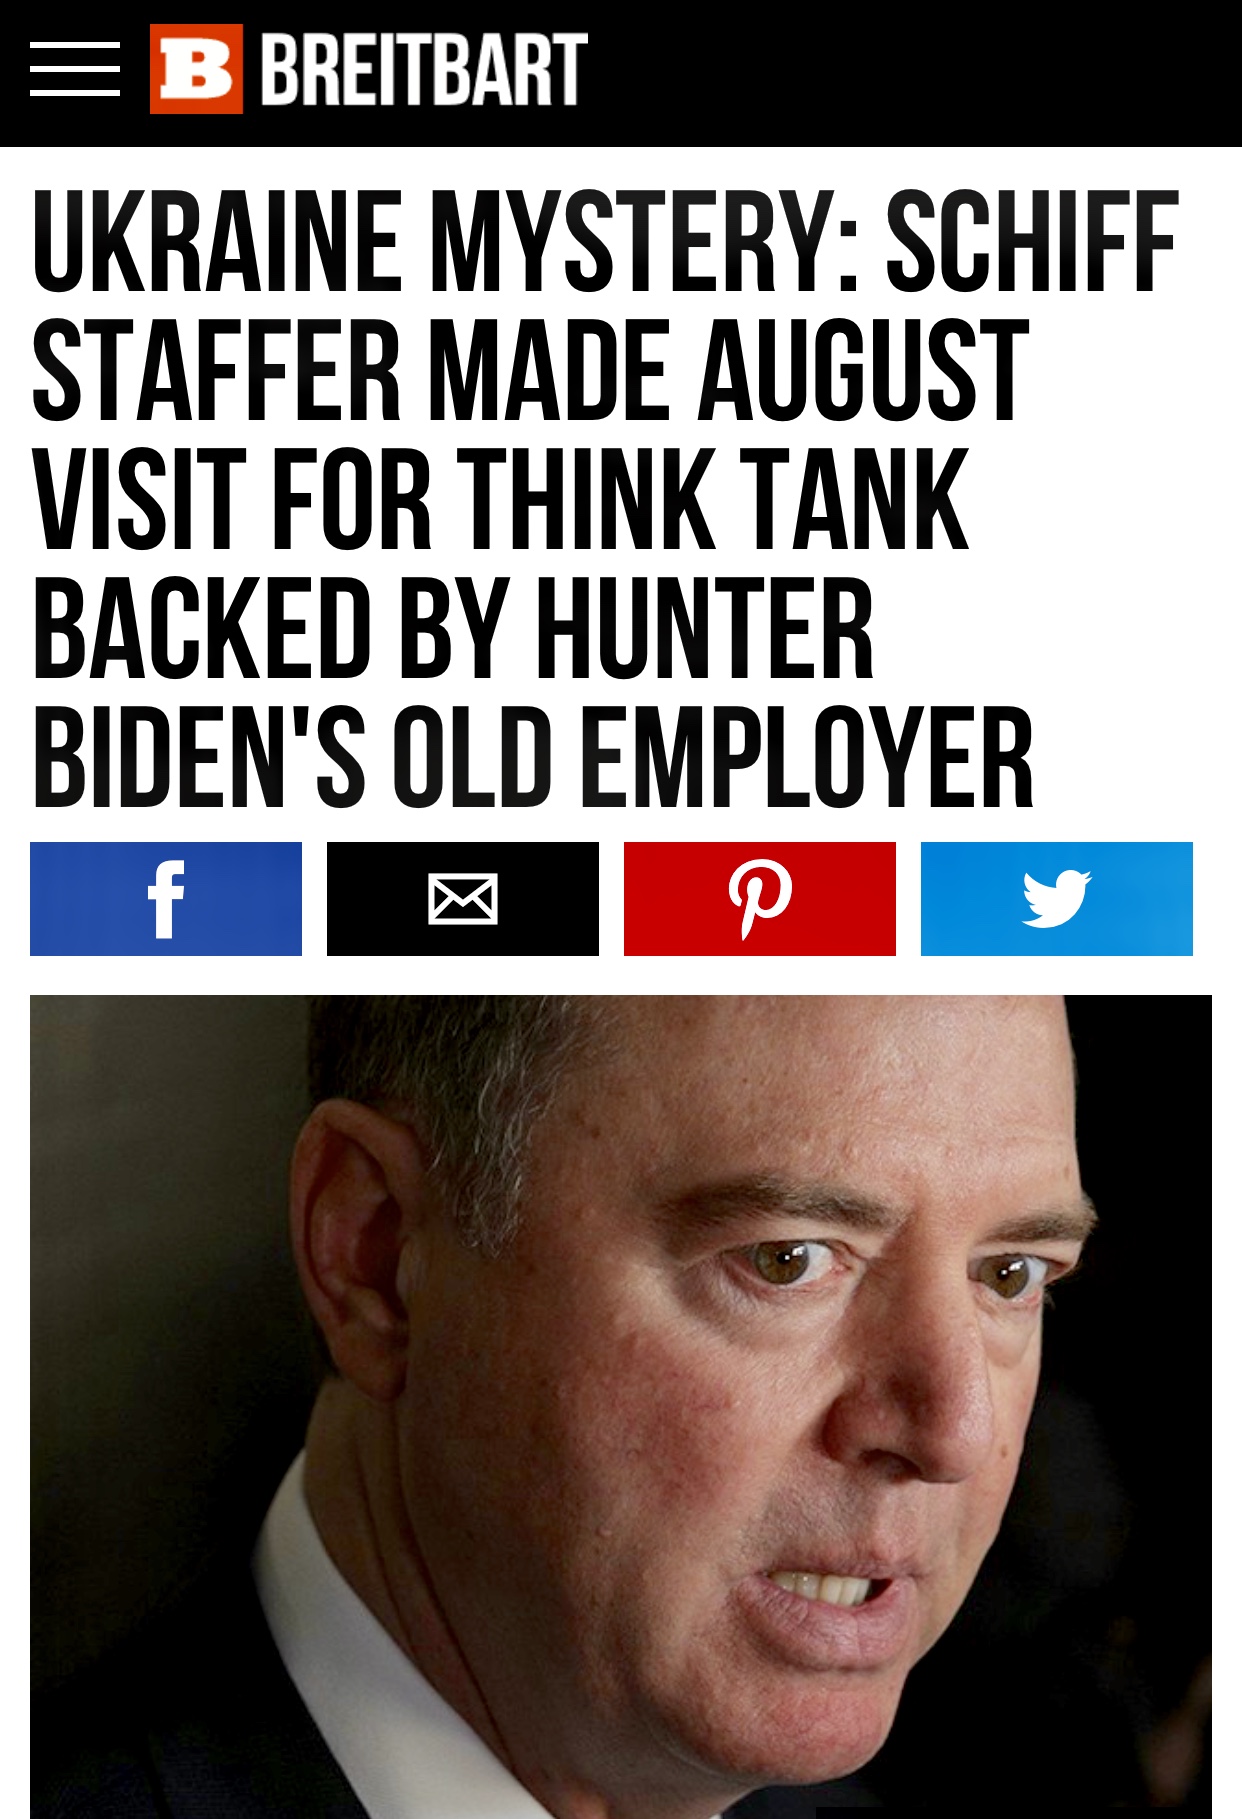 Ukraine Corruption Involves Schiff Staffer Made August Trip for Think Tank Backed by Burisma